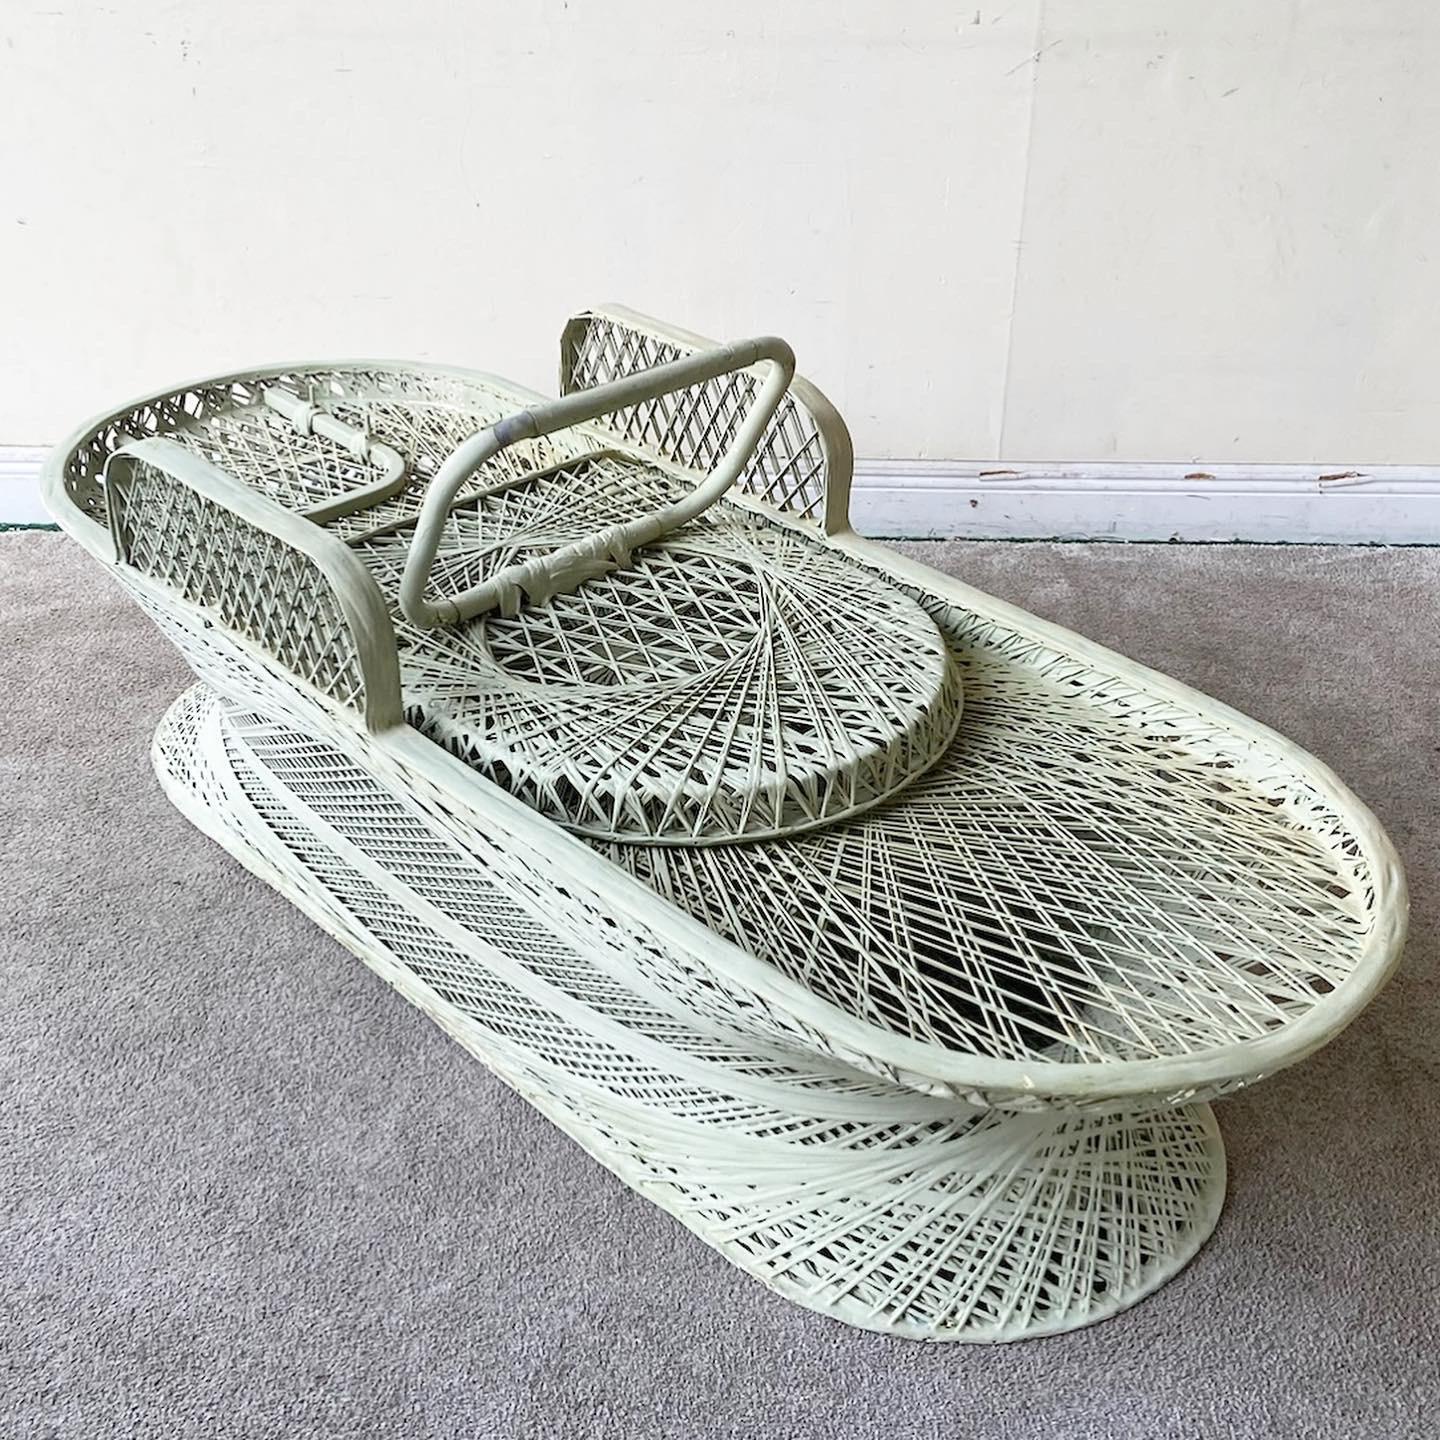 Incredible pair of Mid-Century Modern spun fiberglass chaise lounges by Russell Woodard. Each feature a fantastic woven design with a retractable back rest.